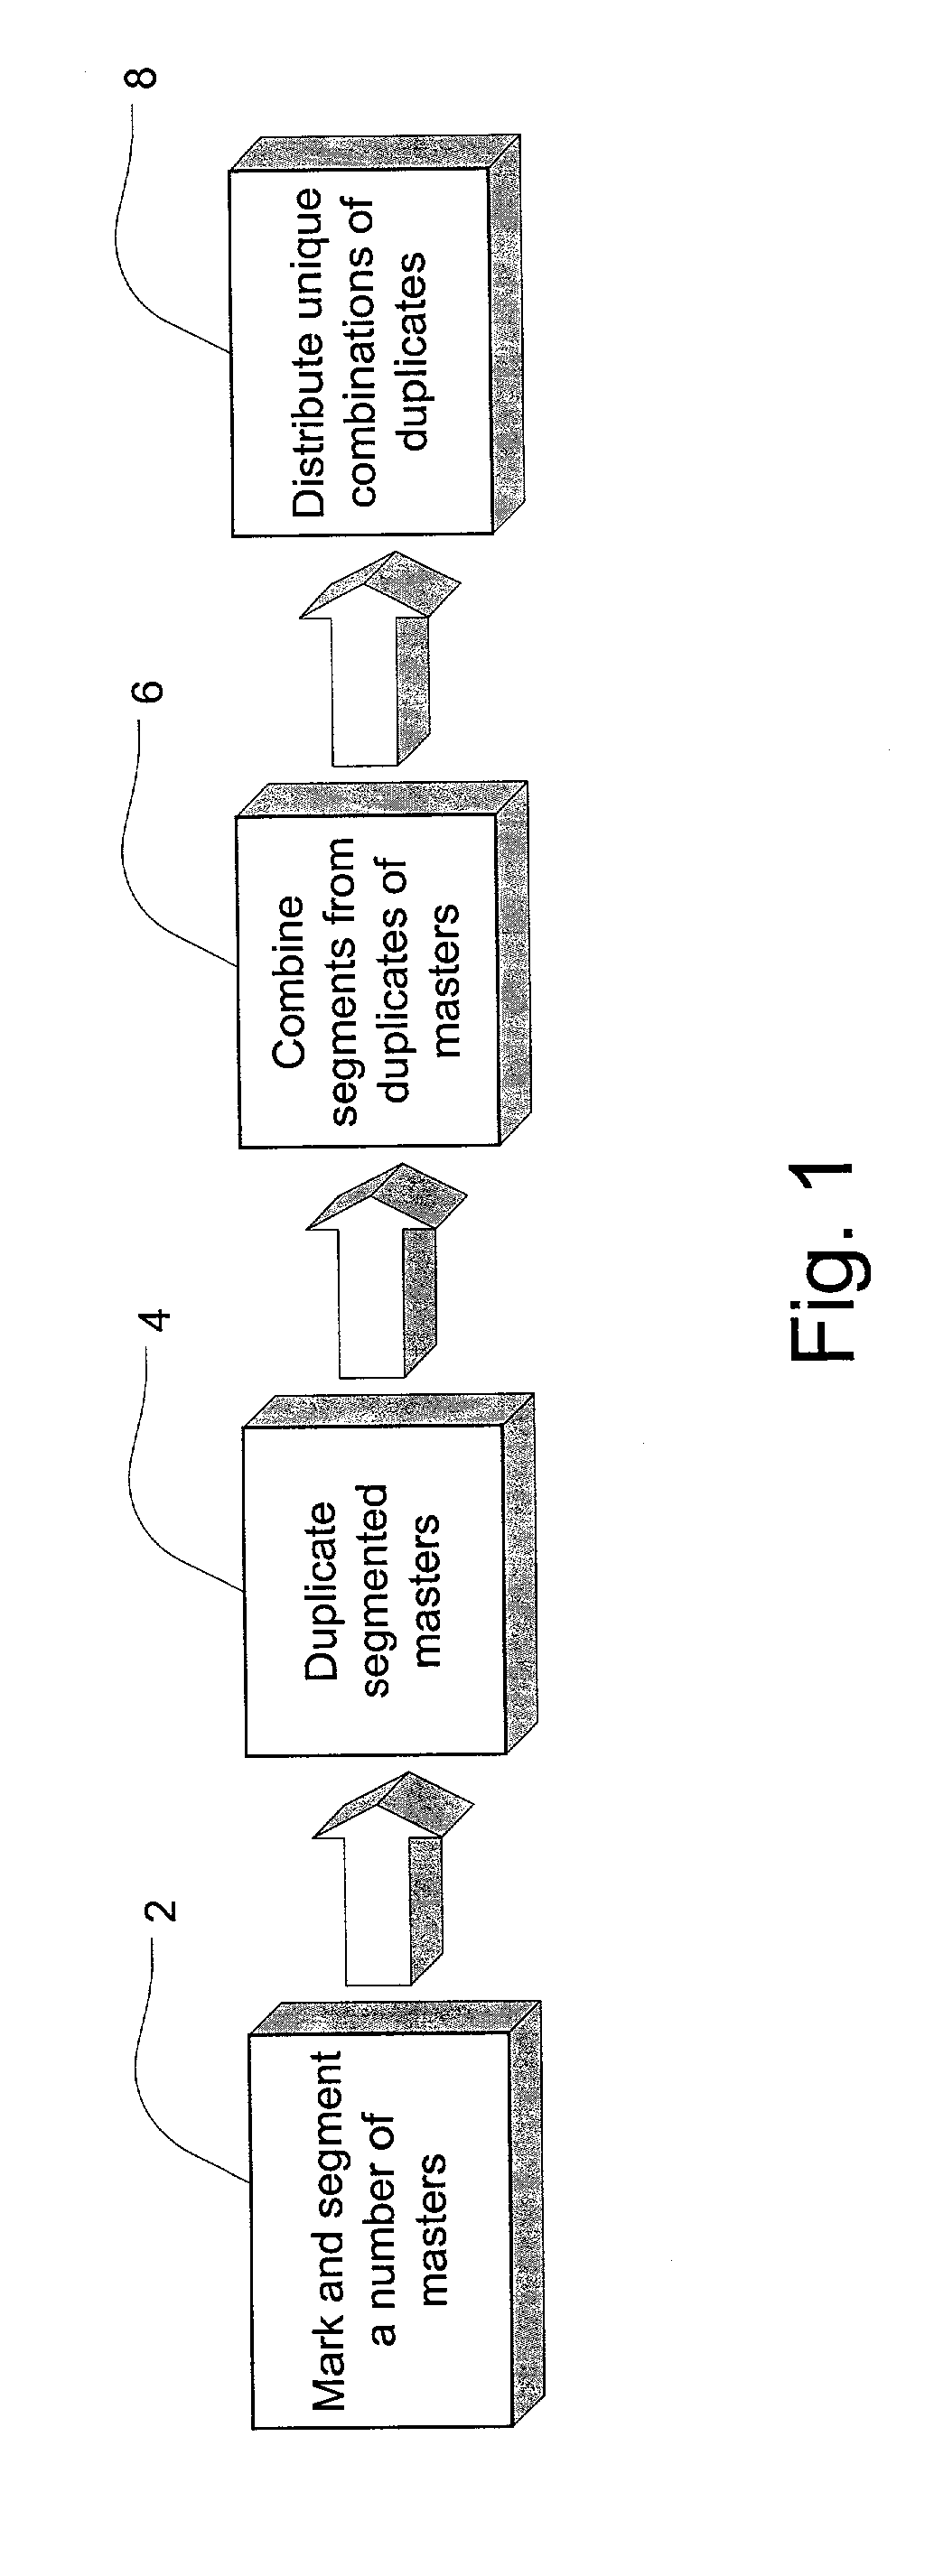 Methods and apparatus for uniquely identifying a large number of film prints